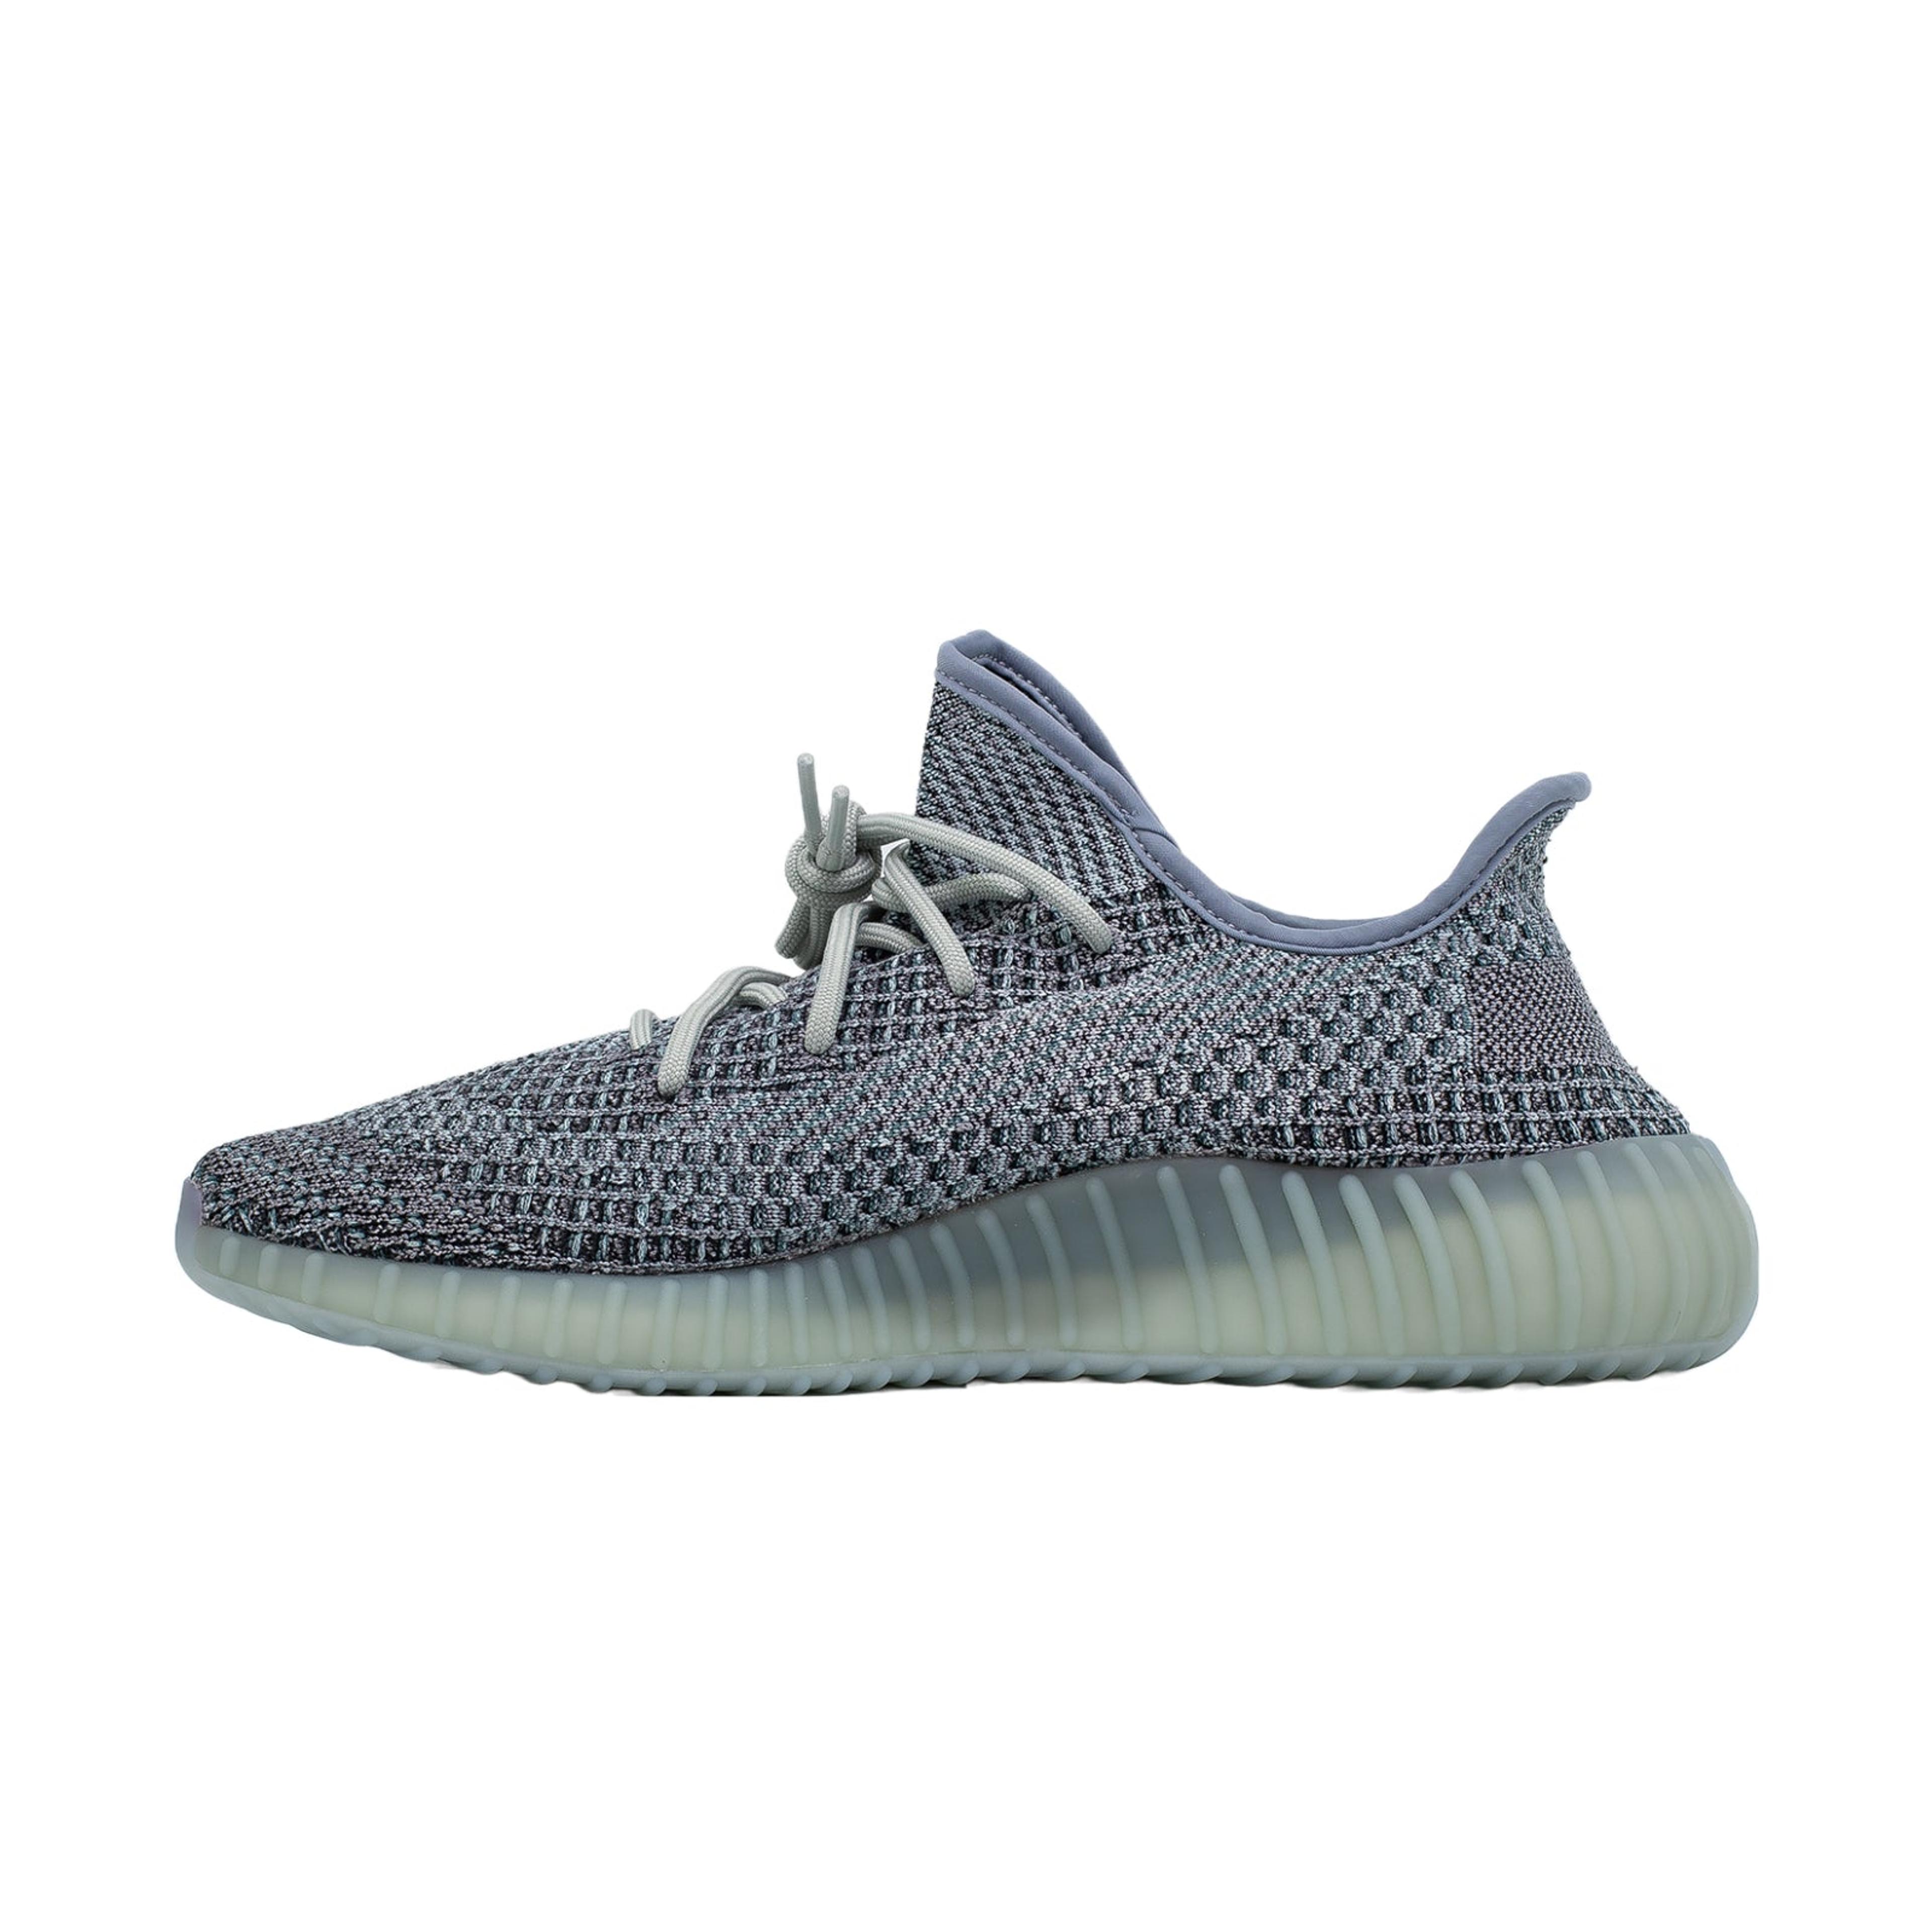 Alternate View 1 of Yeezy Boost 350 V2, Ash Blue